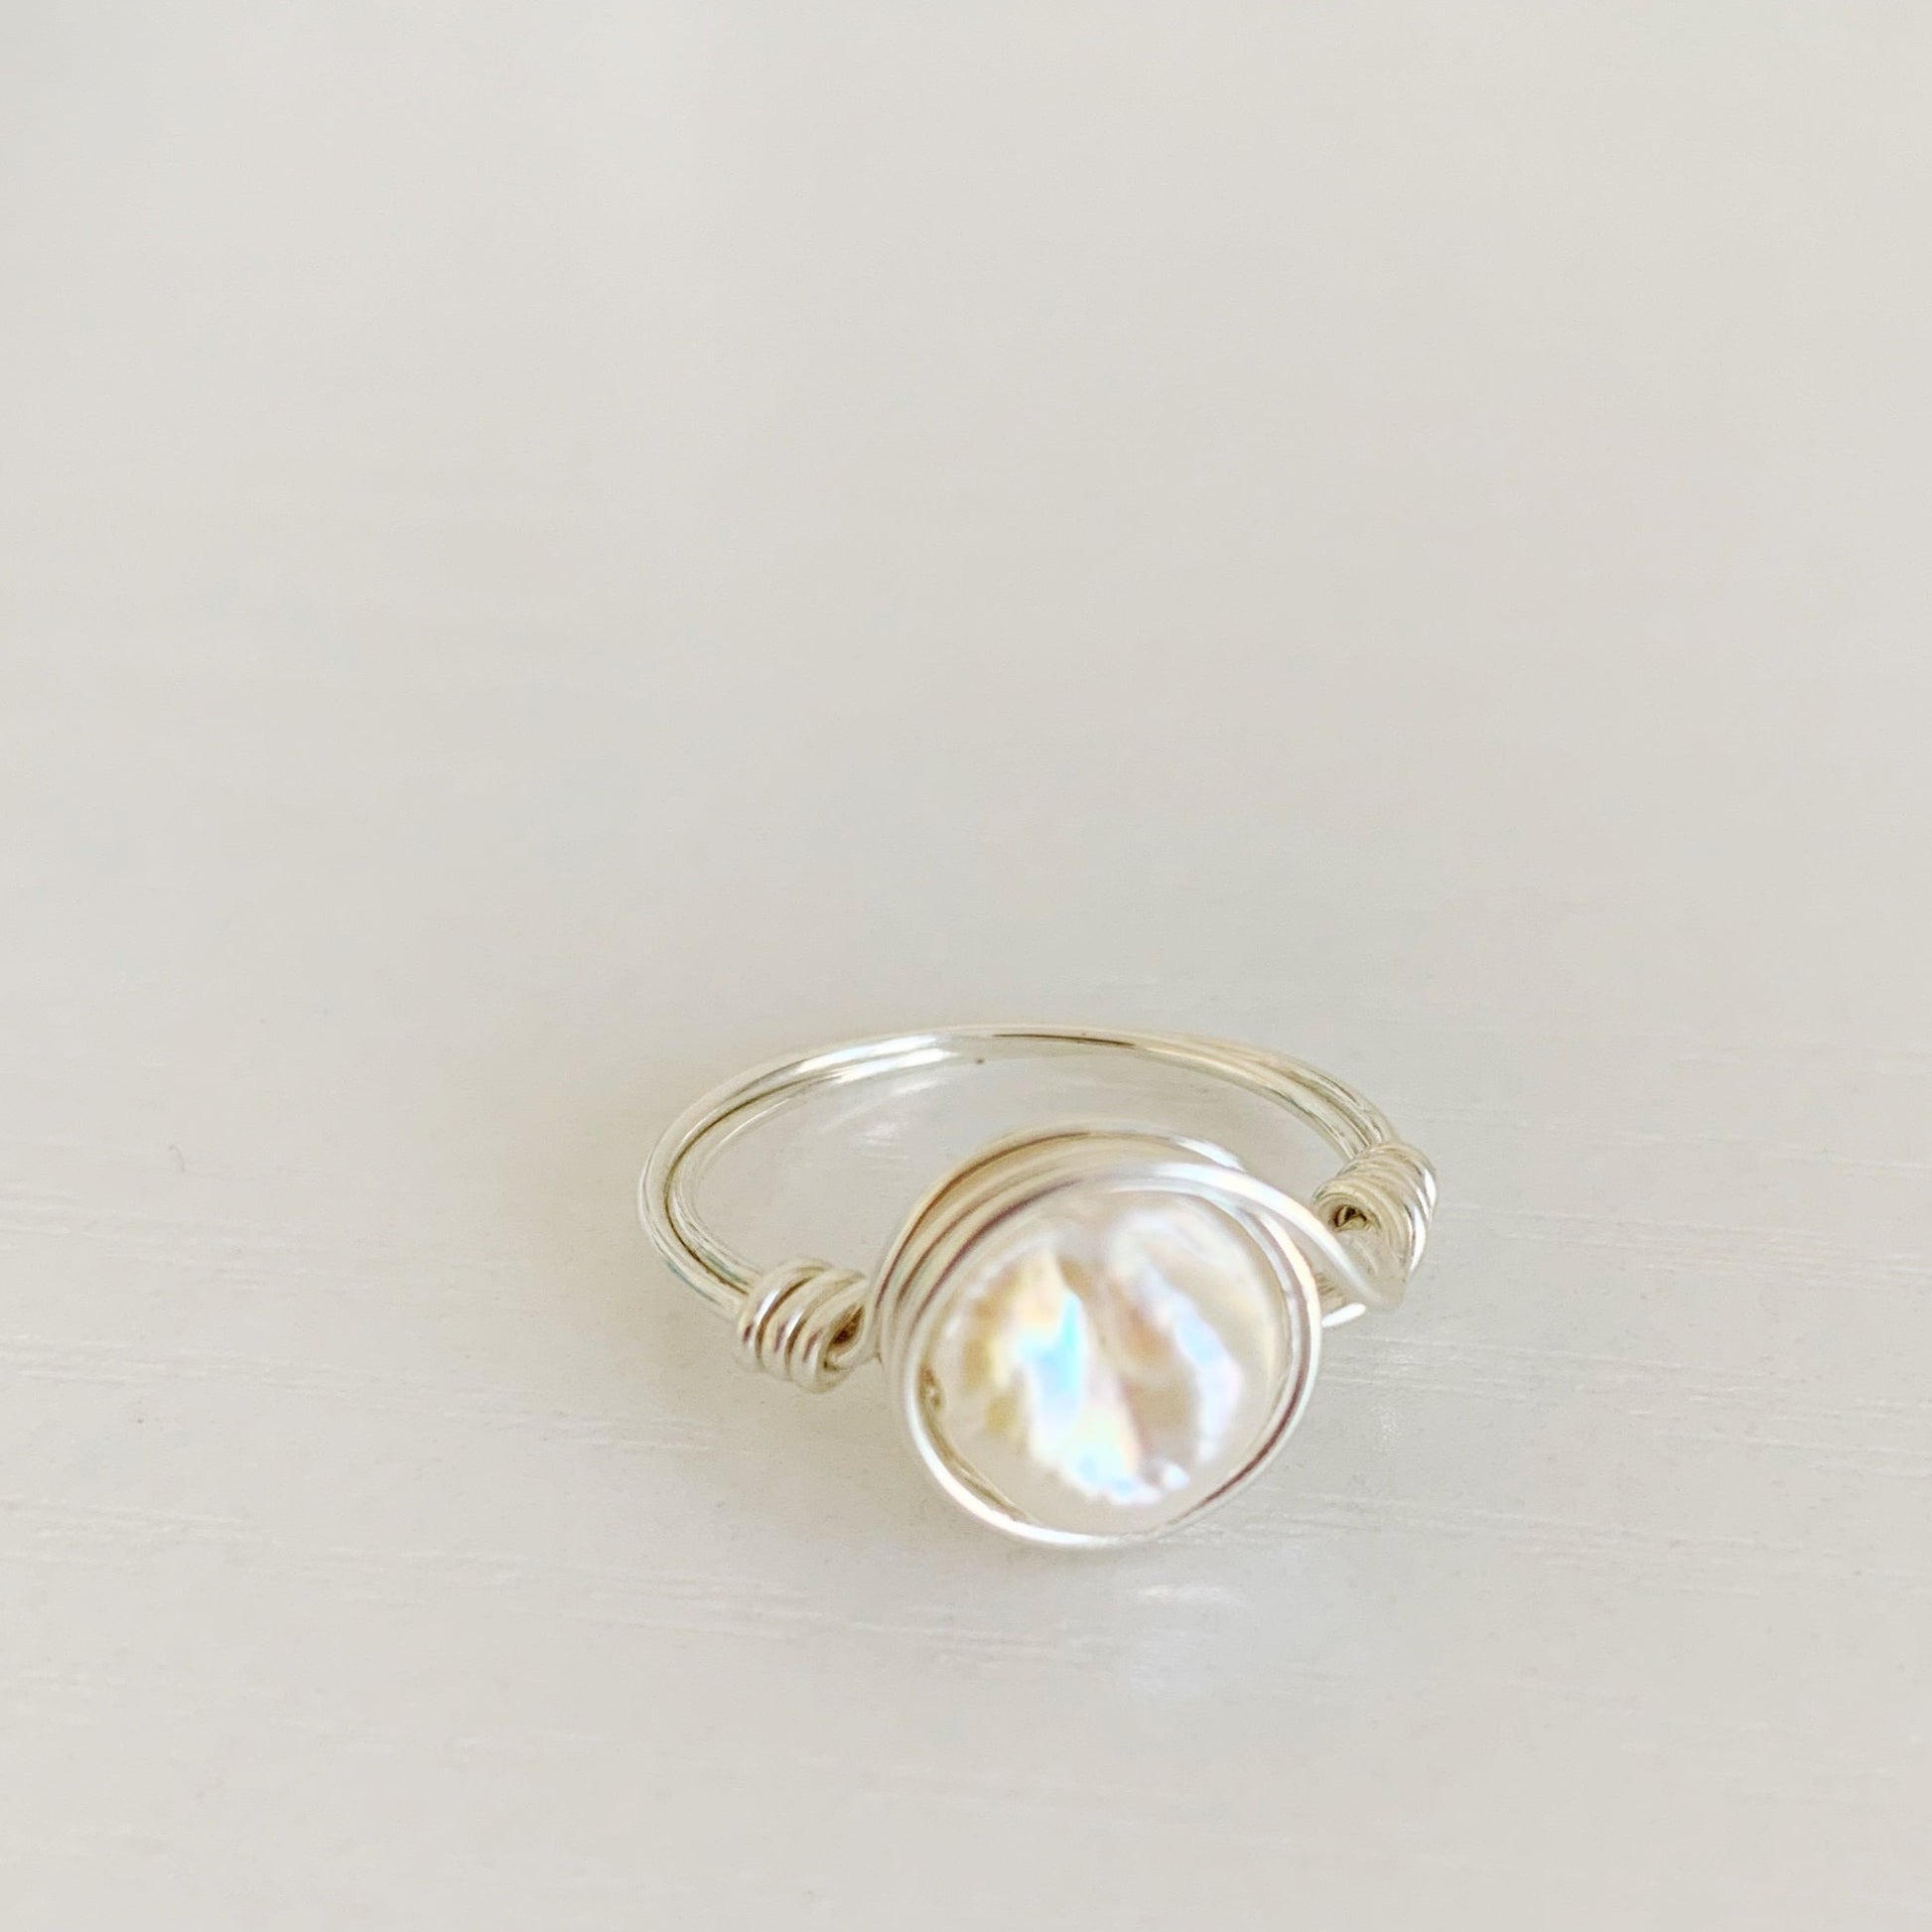 Newport Pearl Ring in sterling silver by mermaids and madeleines. this ring features a freshwater coin pearl and sterling silver wire. The ring is a wire wrap style making it simple and artful. this ring is photographed from a slight angle side view on a white surface